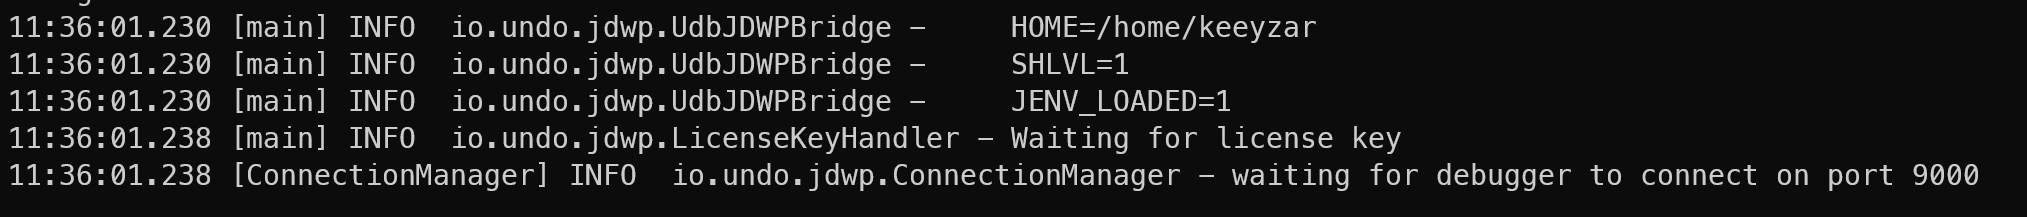 terminal output showing that the application is ready to connect, waiting for a debugger to connect